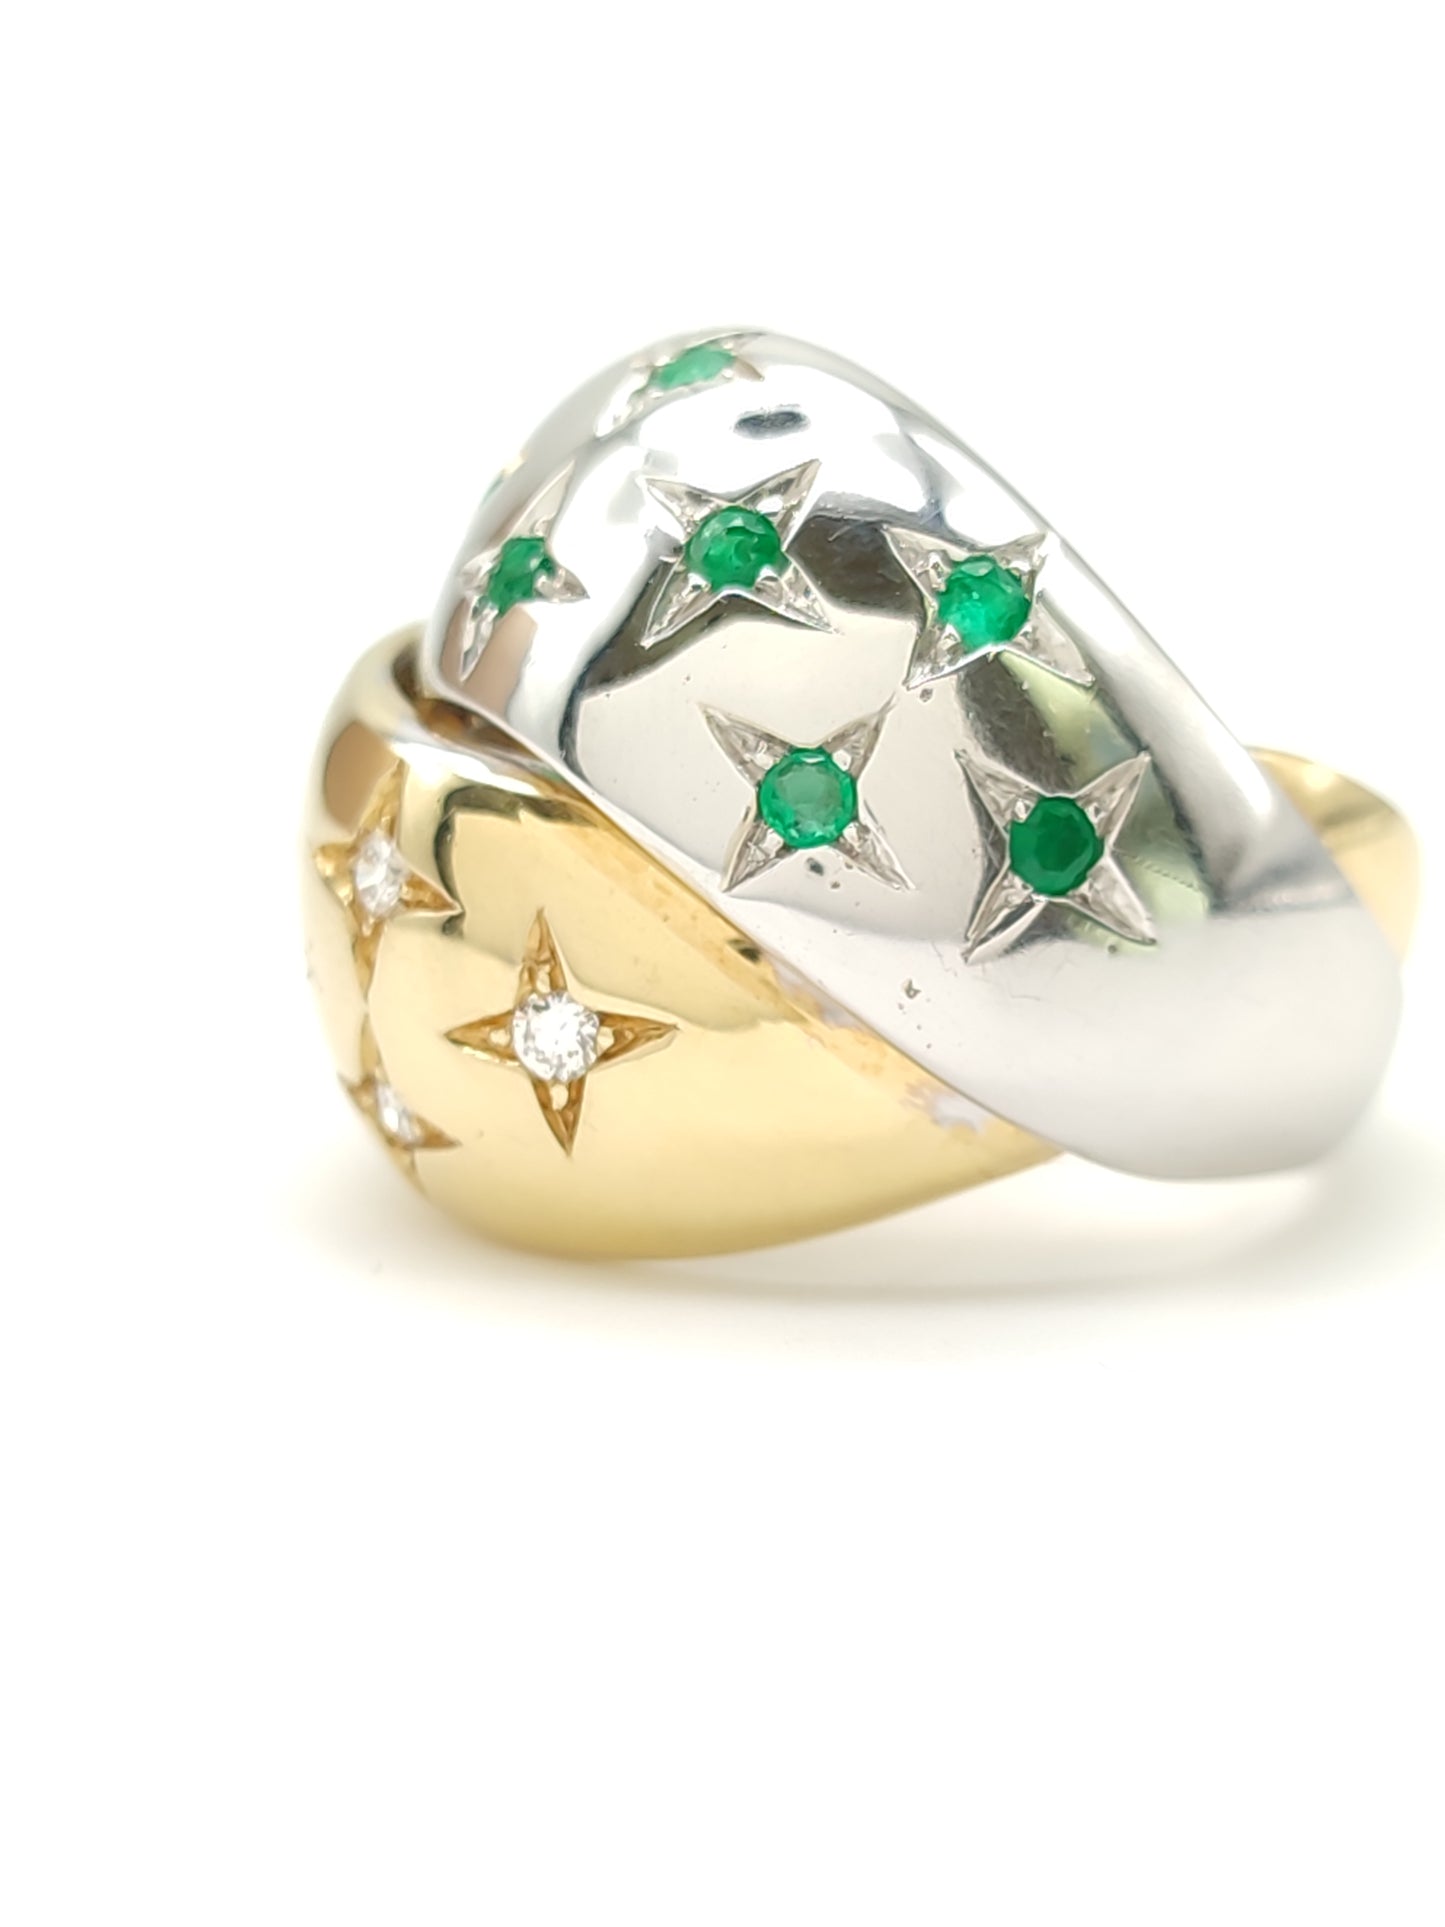 Pavan - Gold band ring with diamonds and emeralds